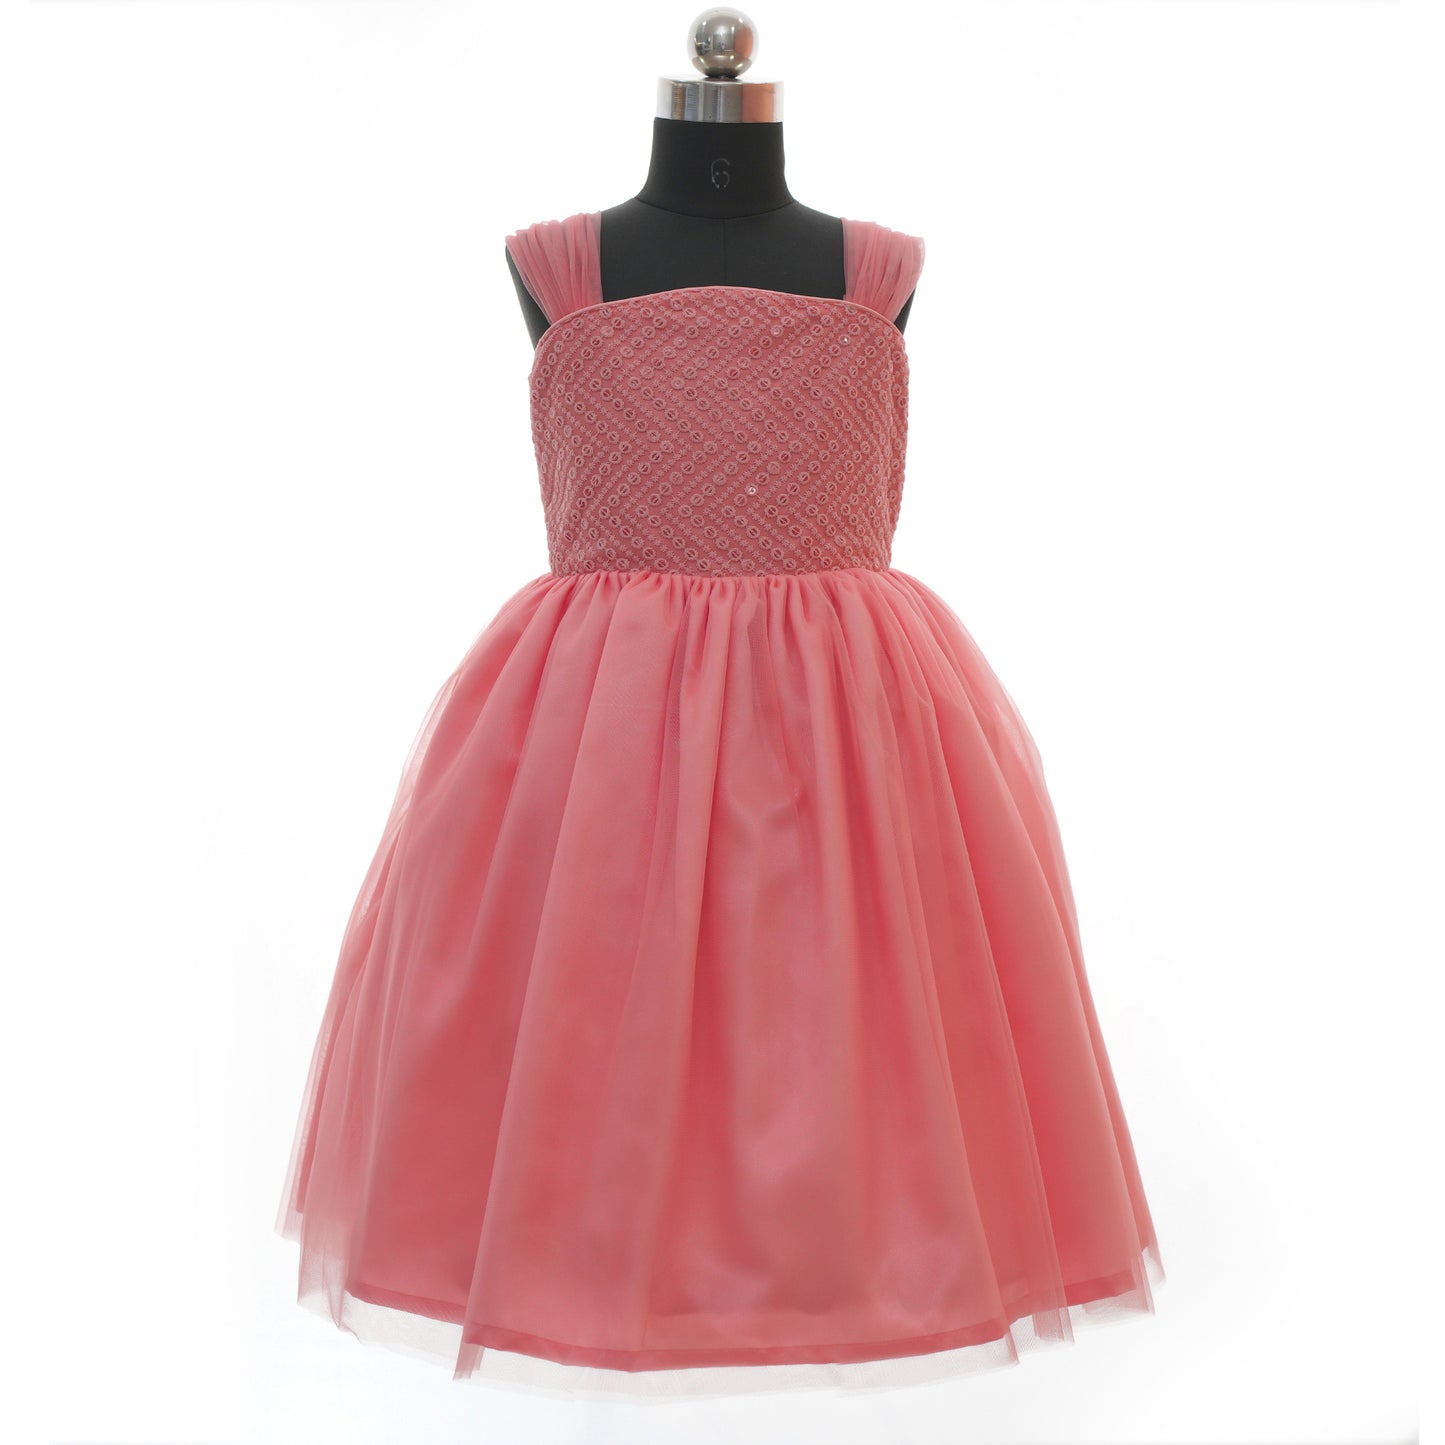 HEYKIDOO kids clothing stores online new design party wear dress latest party wear dress for girls comfortable party frock 2023 embroidered knee length satin peach birthday frock online shopping India